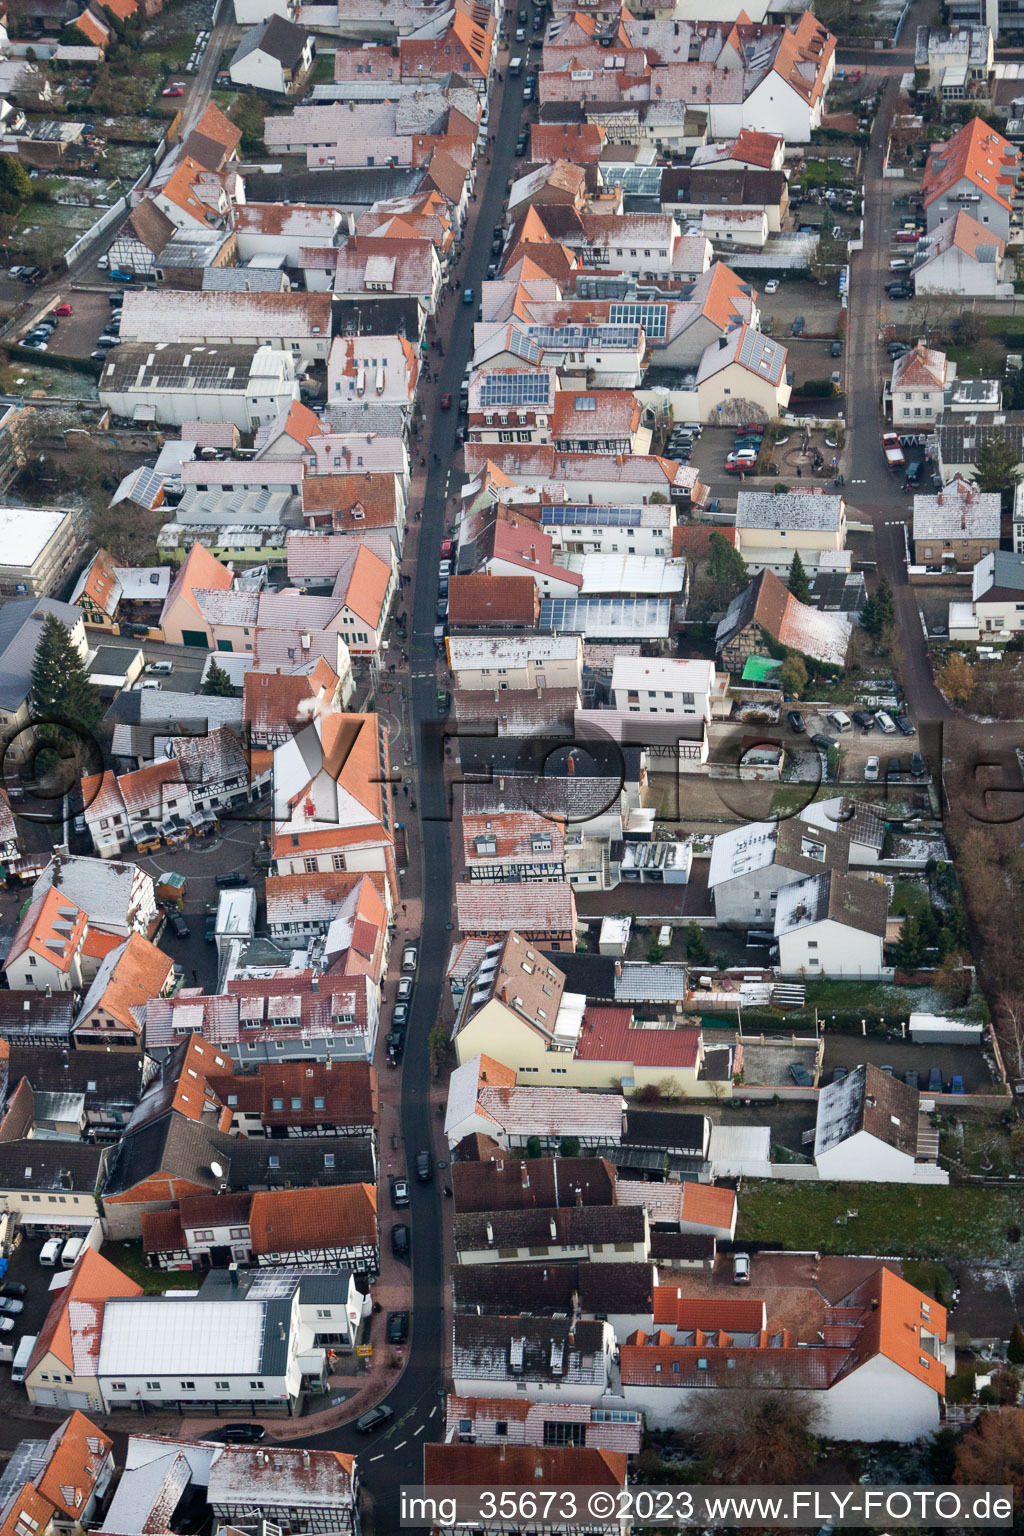 Aerial view of Hauptstr in Kandel in the state Rhineland-Palatinate, Germany